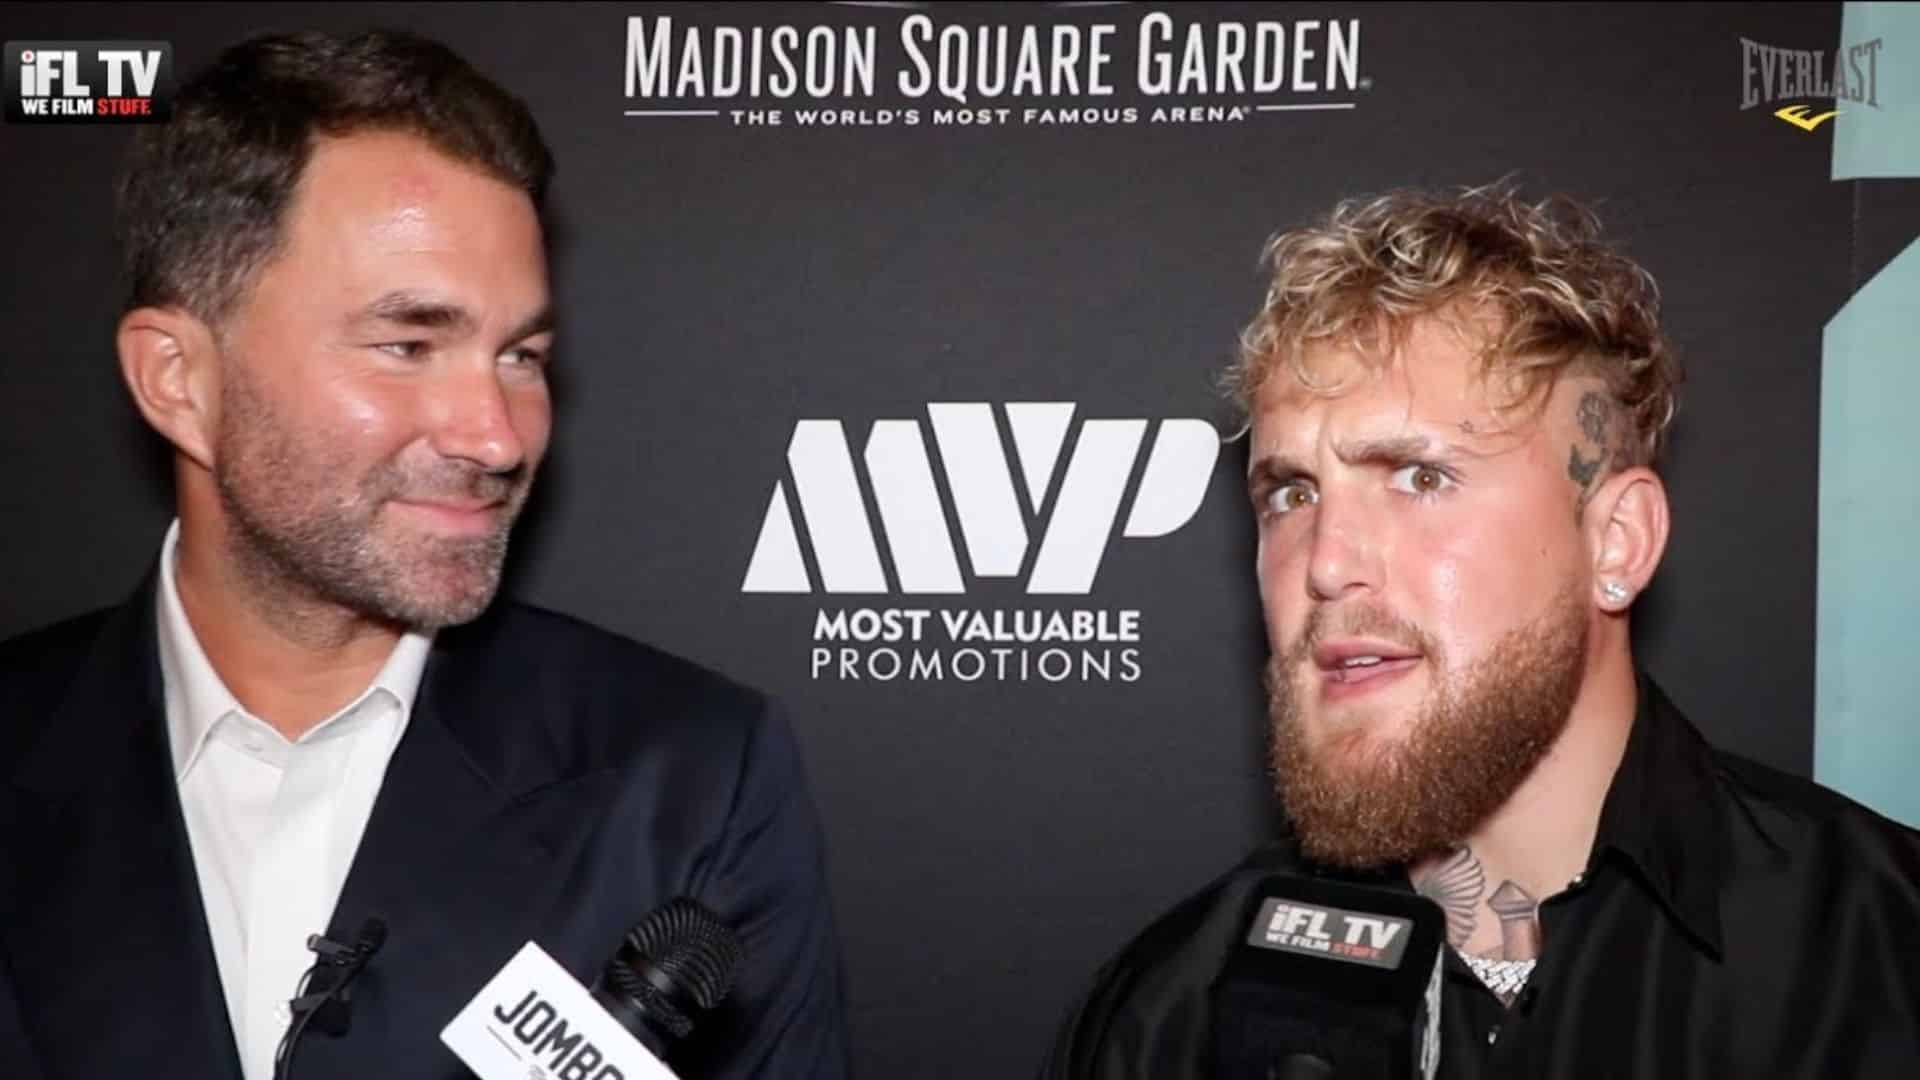 Eddie Hearn and Jake Paul interview side-by-side